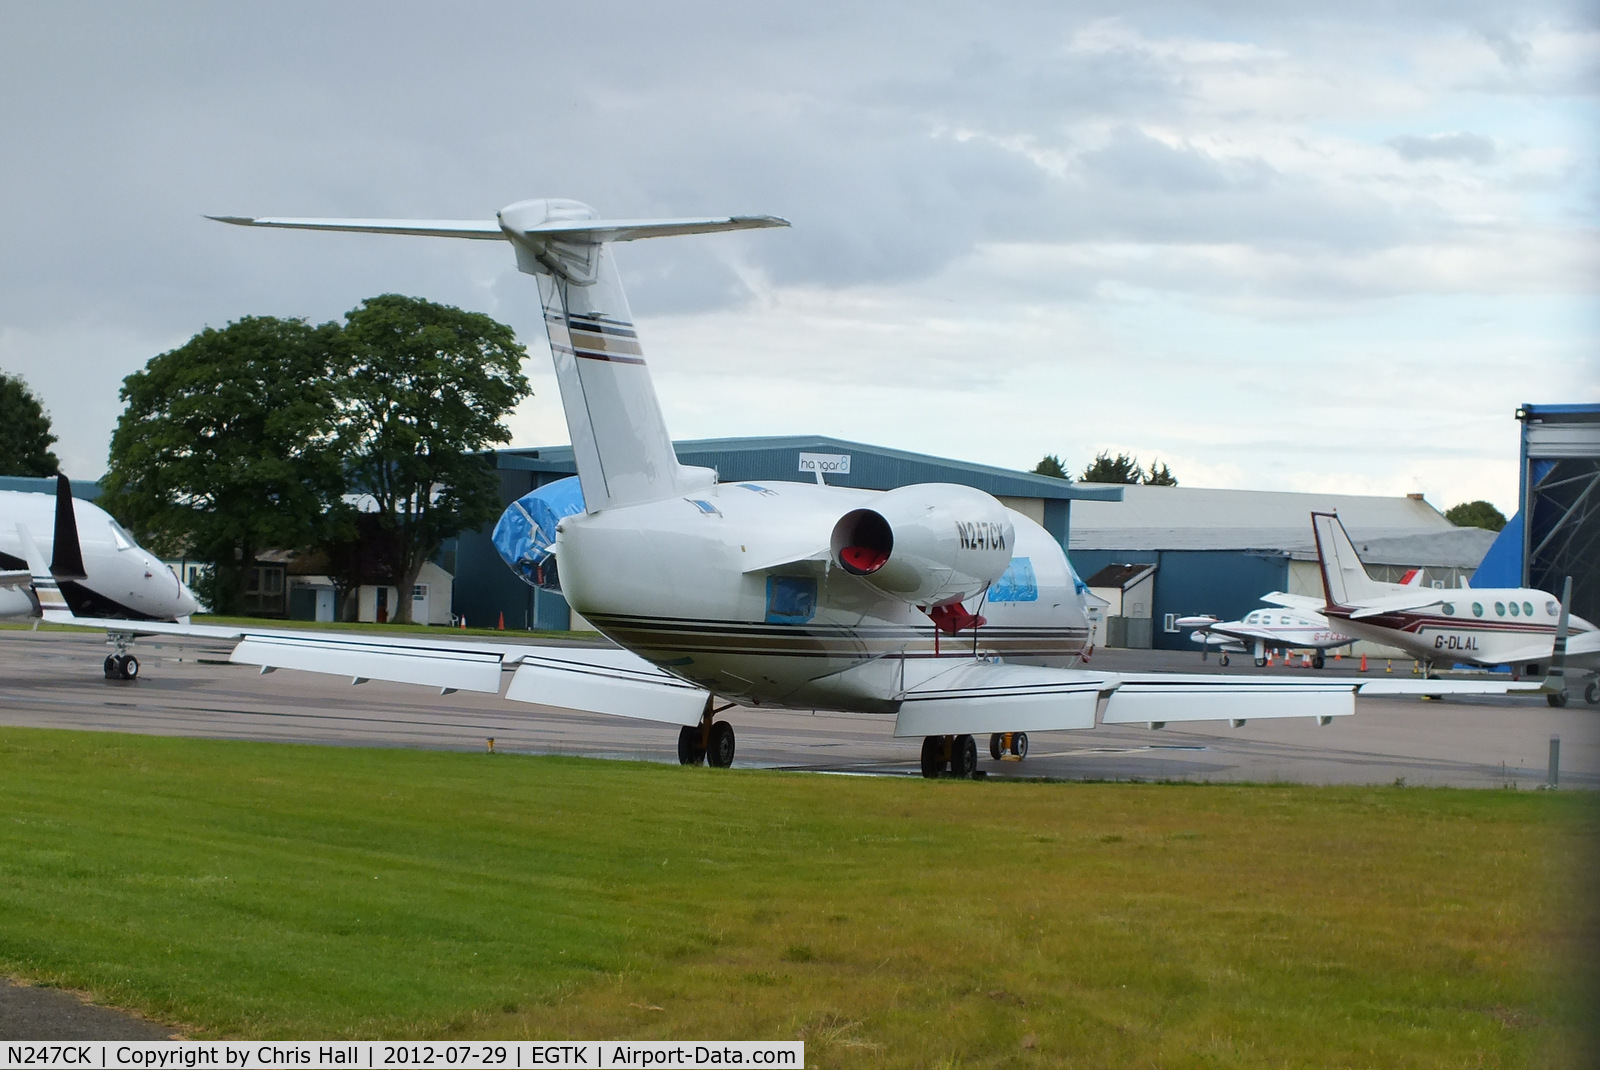 N247CK, 1982 Canadair Challenger 600S (CL-600-1A11) C/N 1045, Glaceair, appears to be in storeage at Oxford